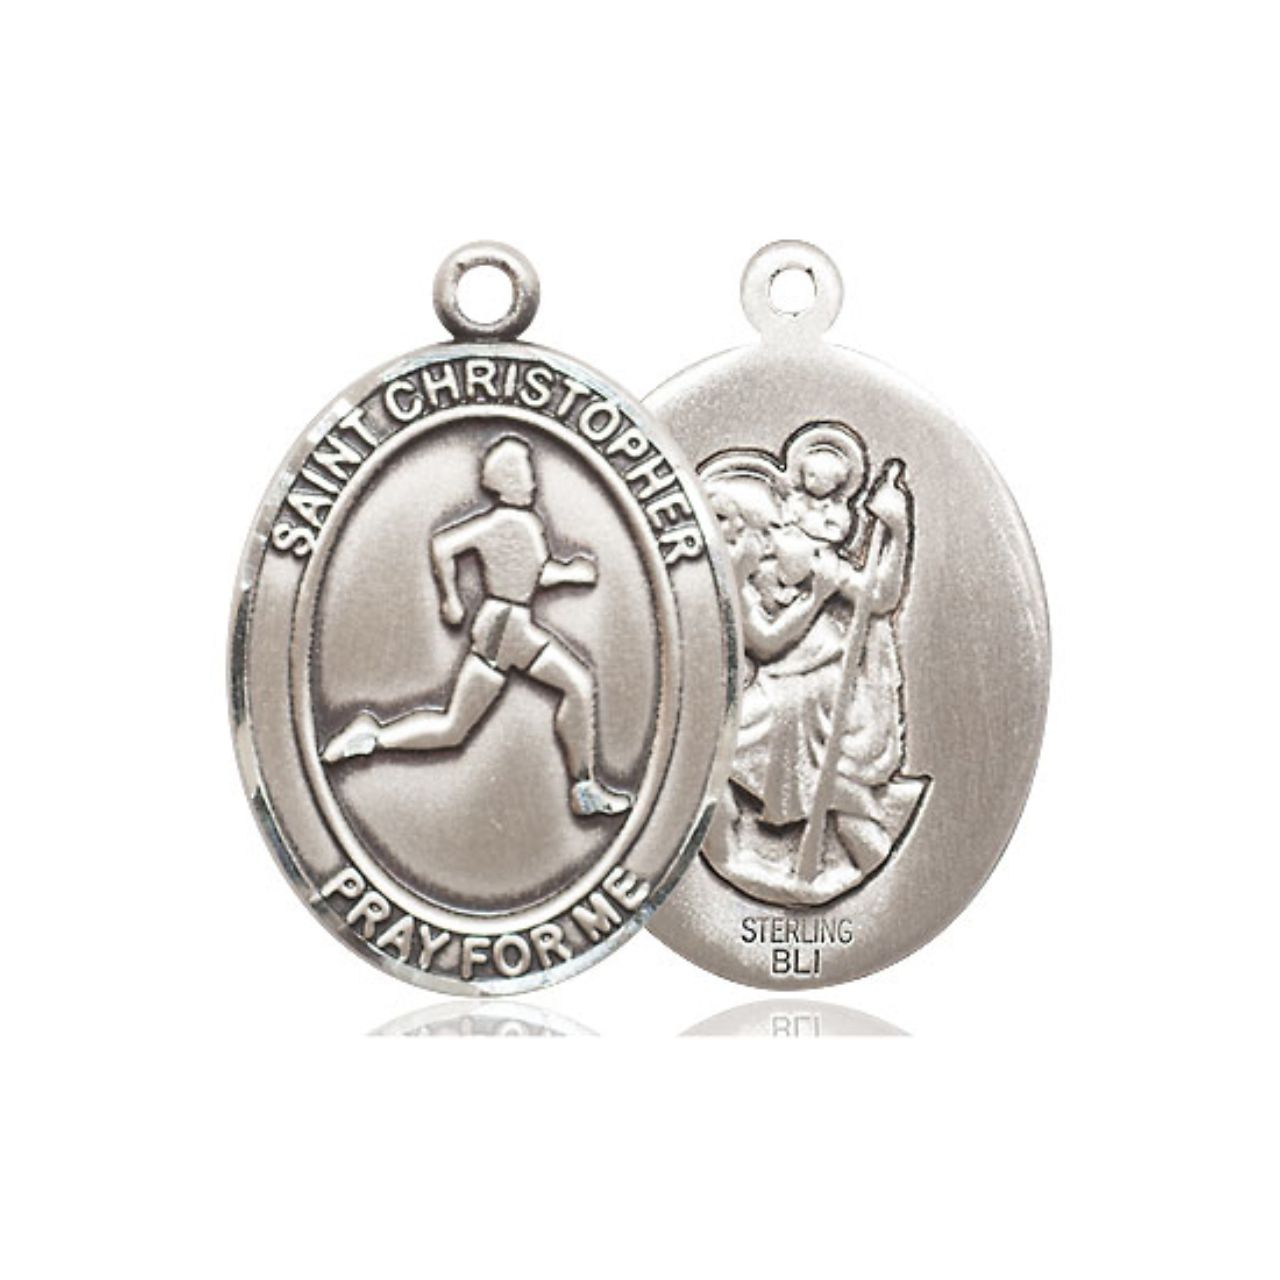 St. Christopher Track & Field Medal - Sterling Silver Oval Pendant (3 Sizes)